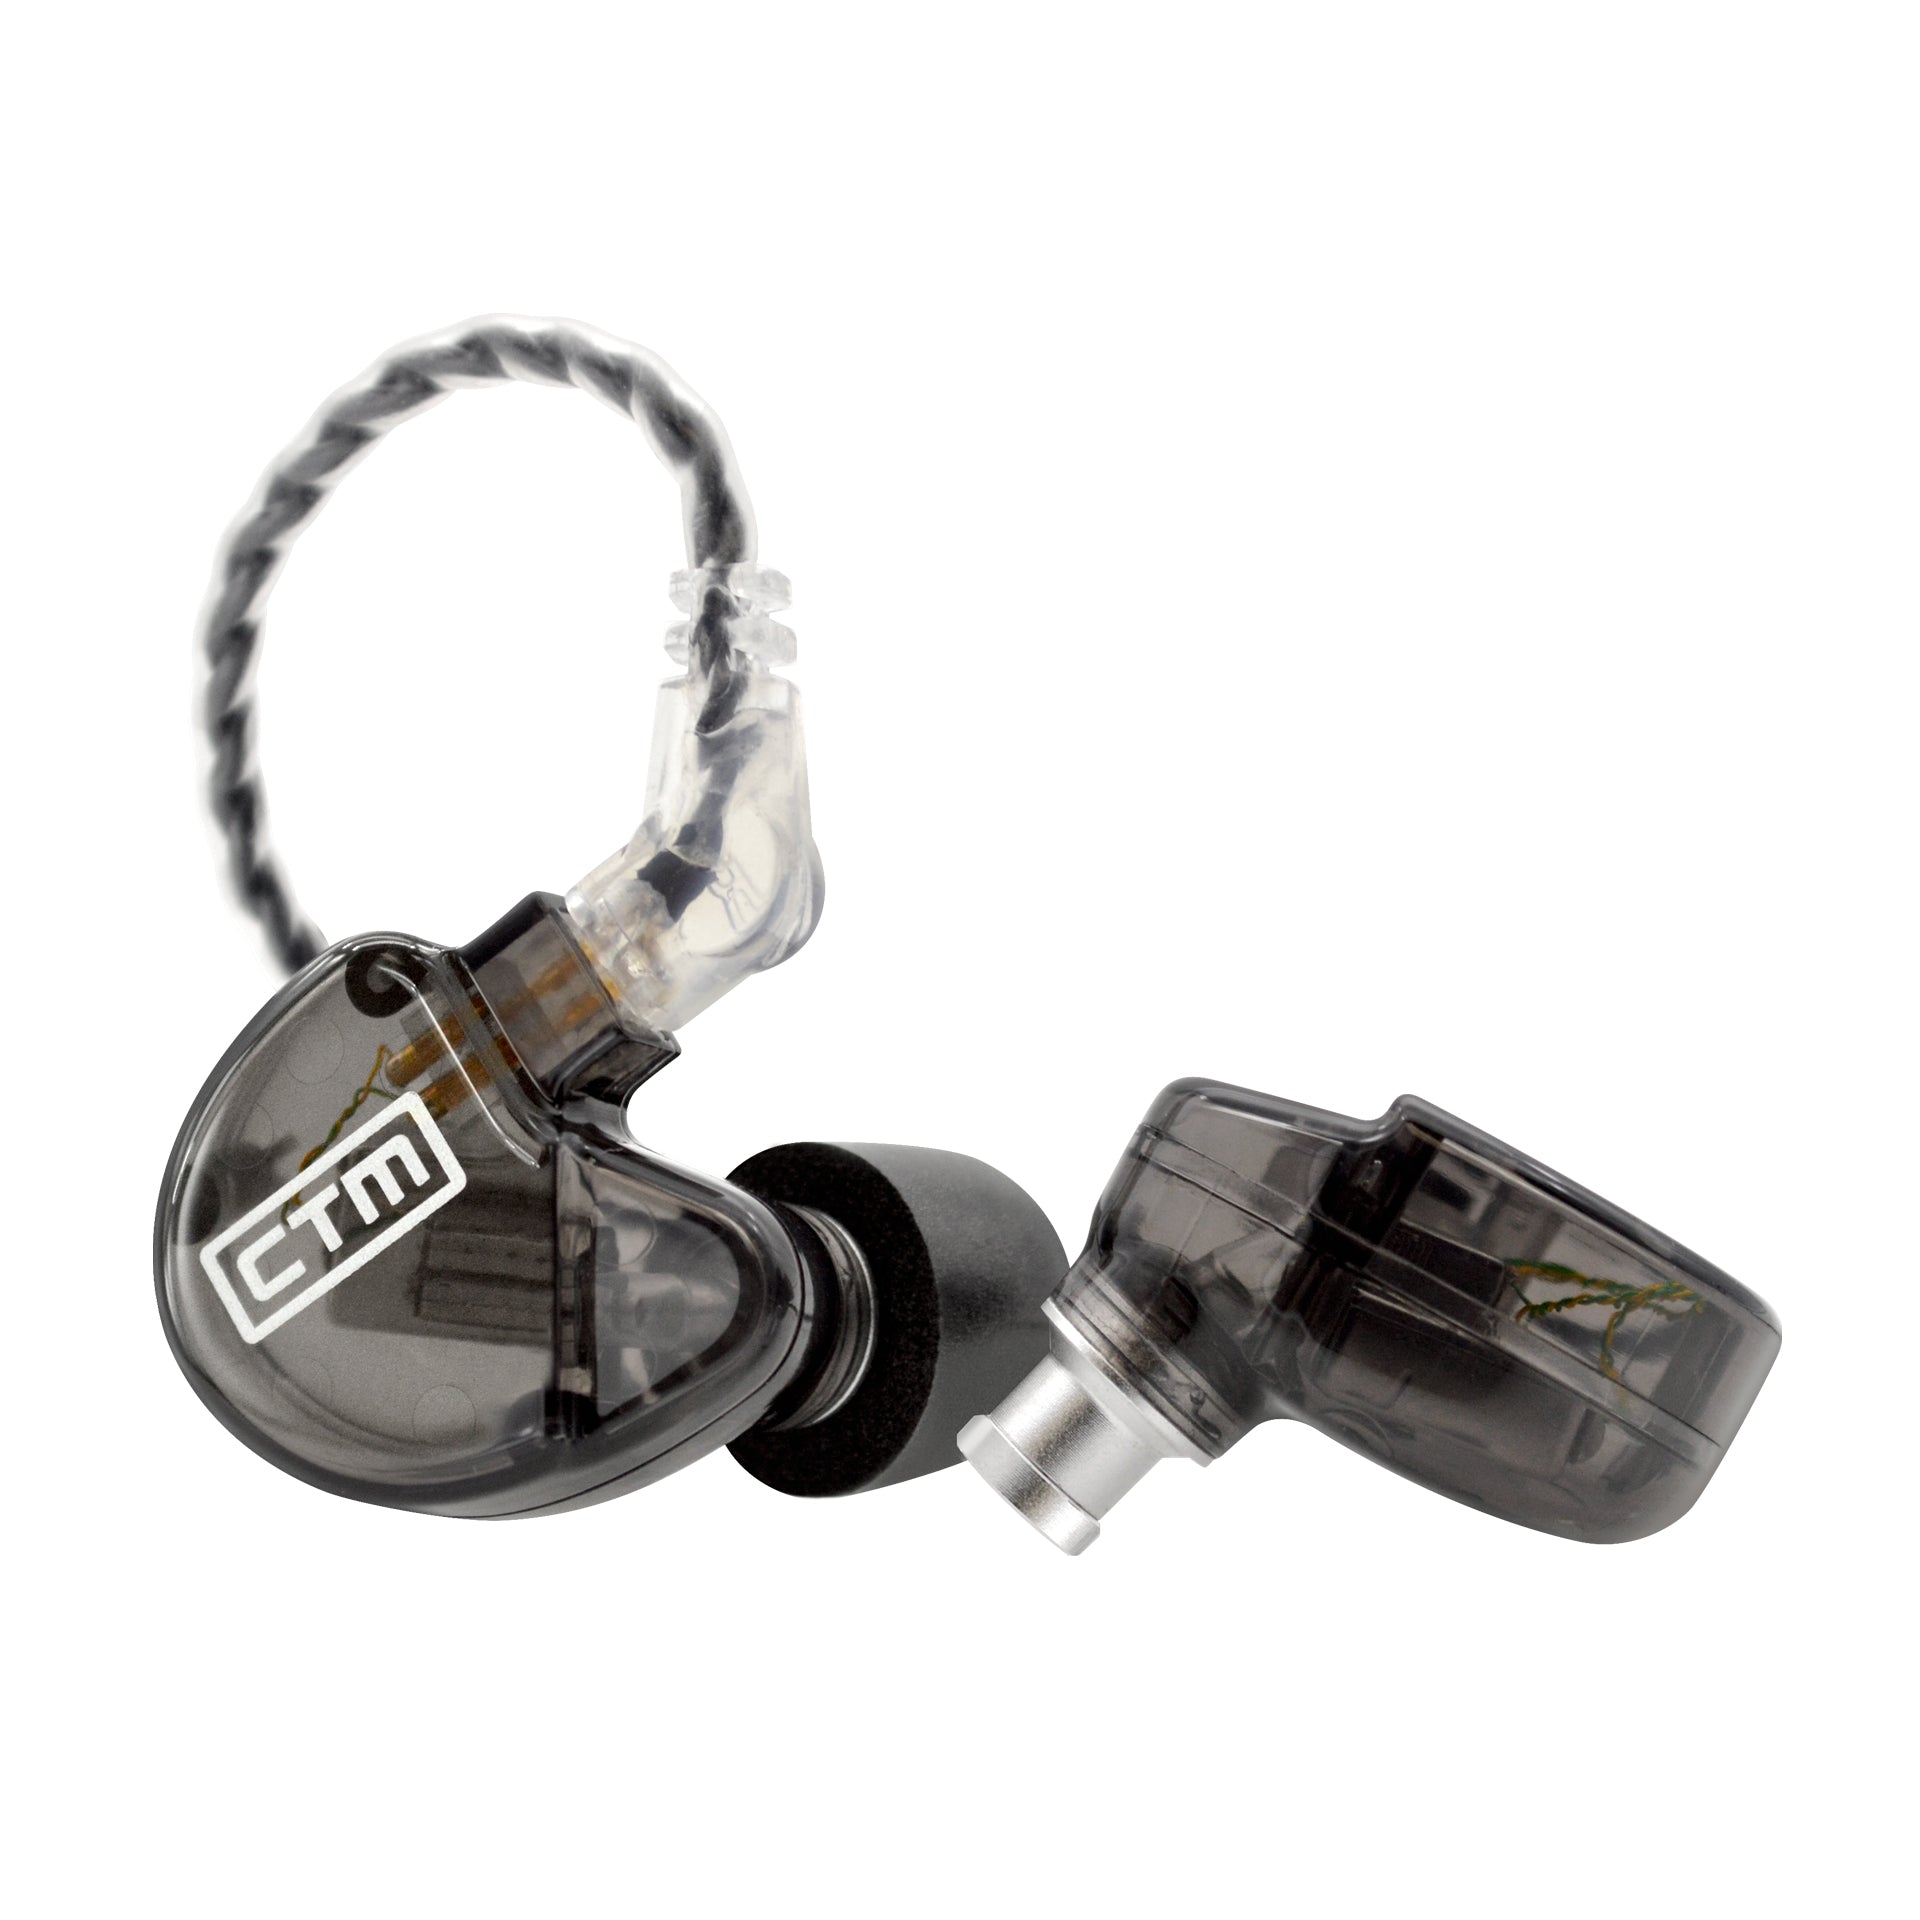 CTM CE320 Universal Fit Triple-Driver In Ear Monitors